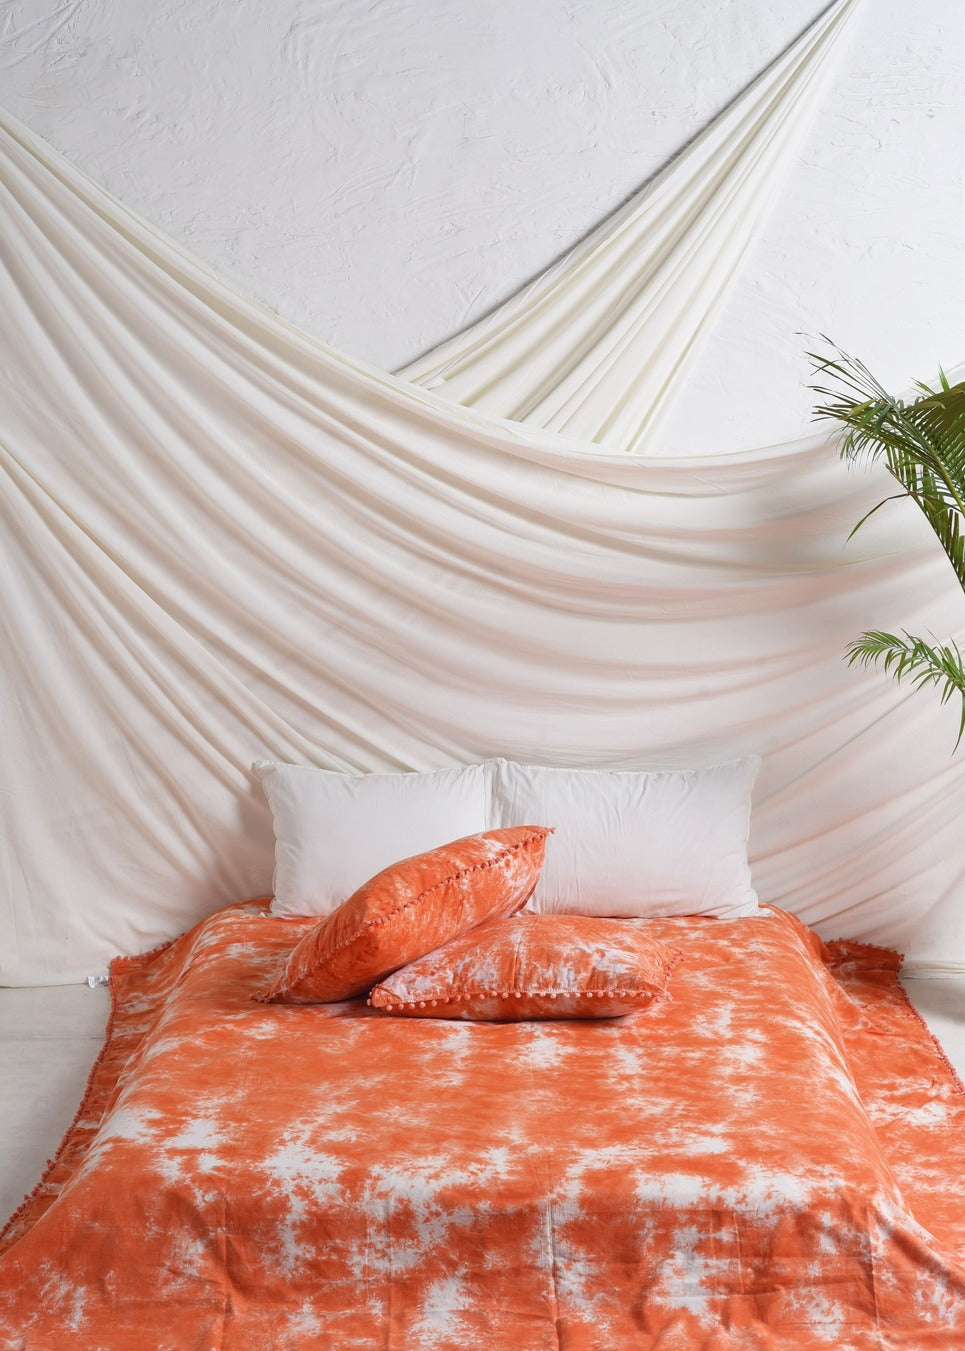 Orange and White Tie-Dye Duvet Cover with Pillow cases Set